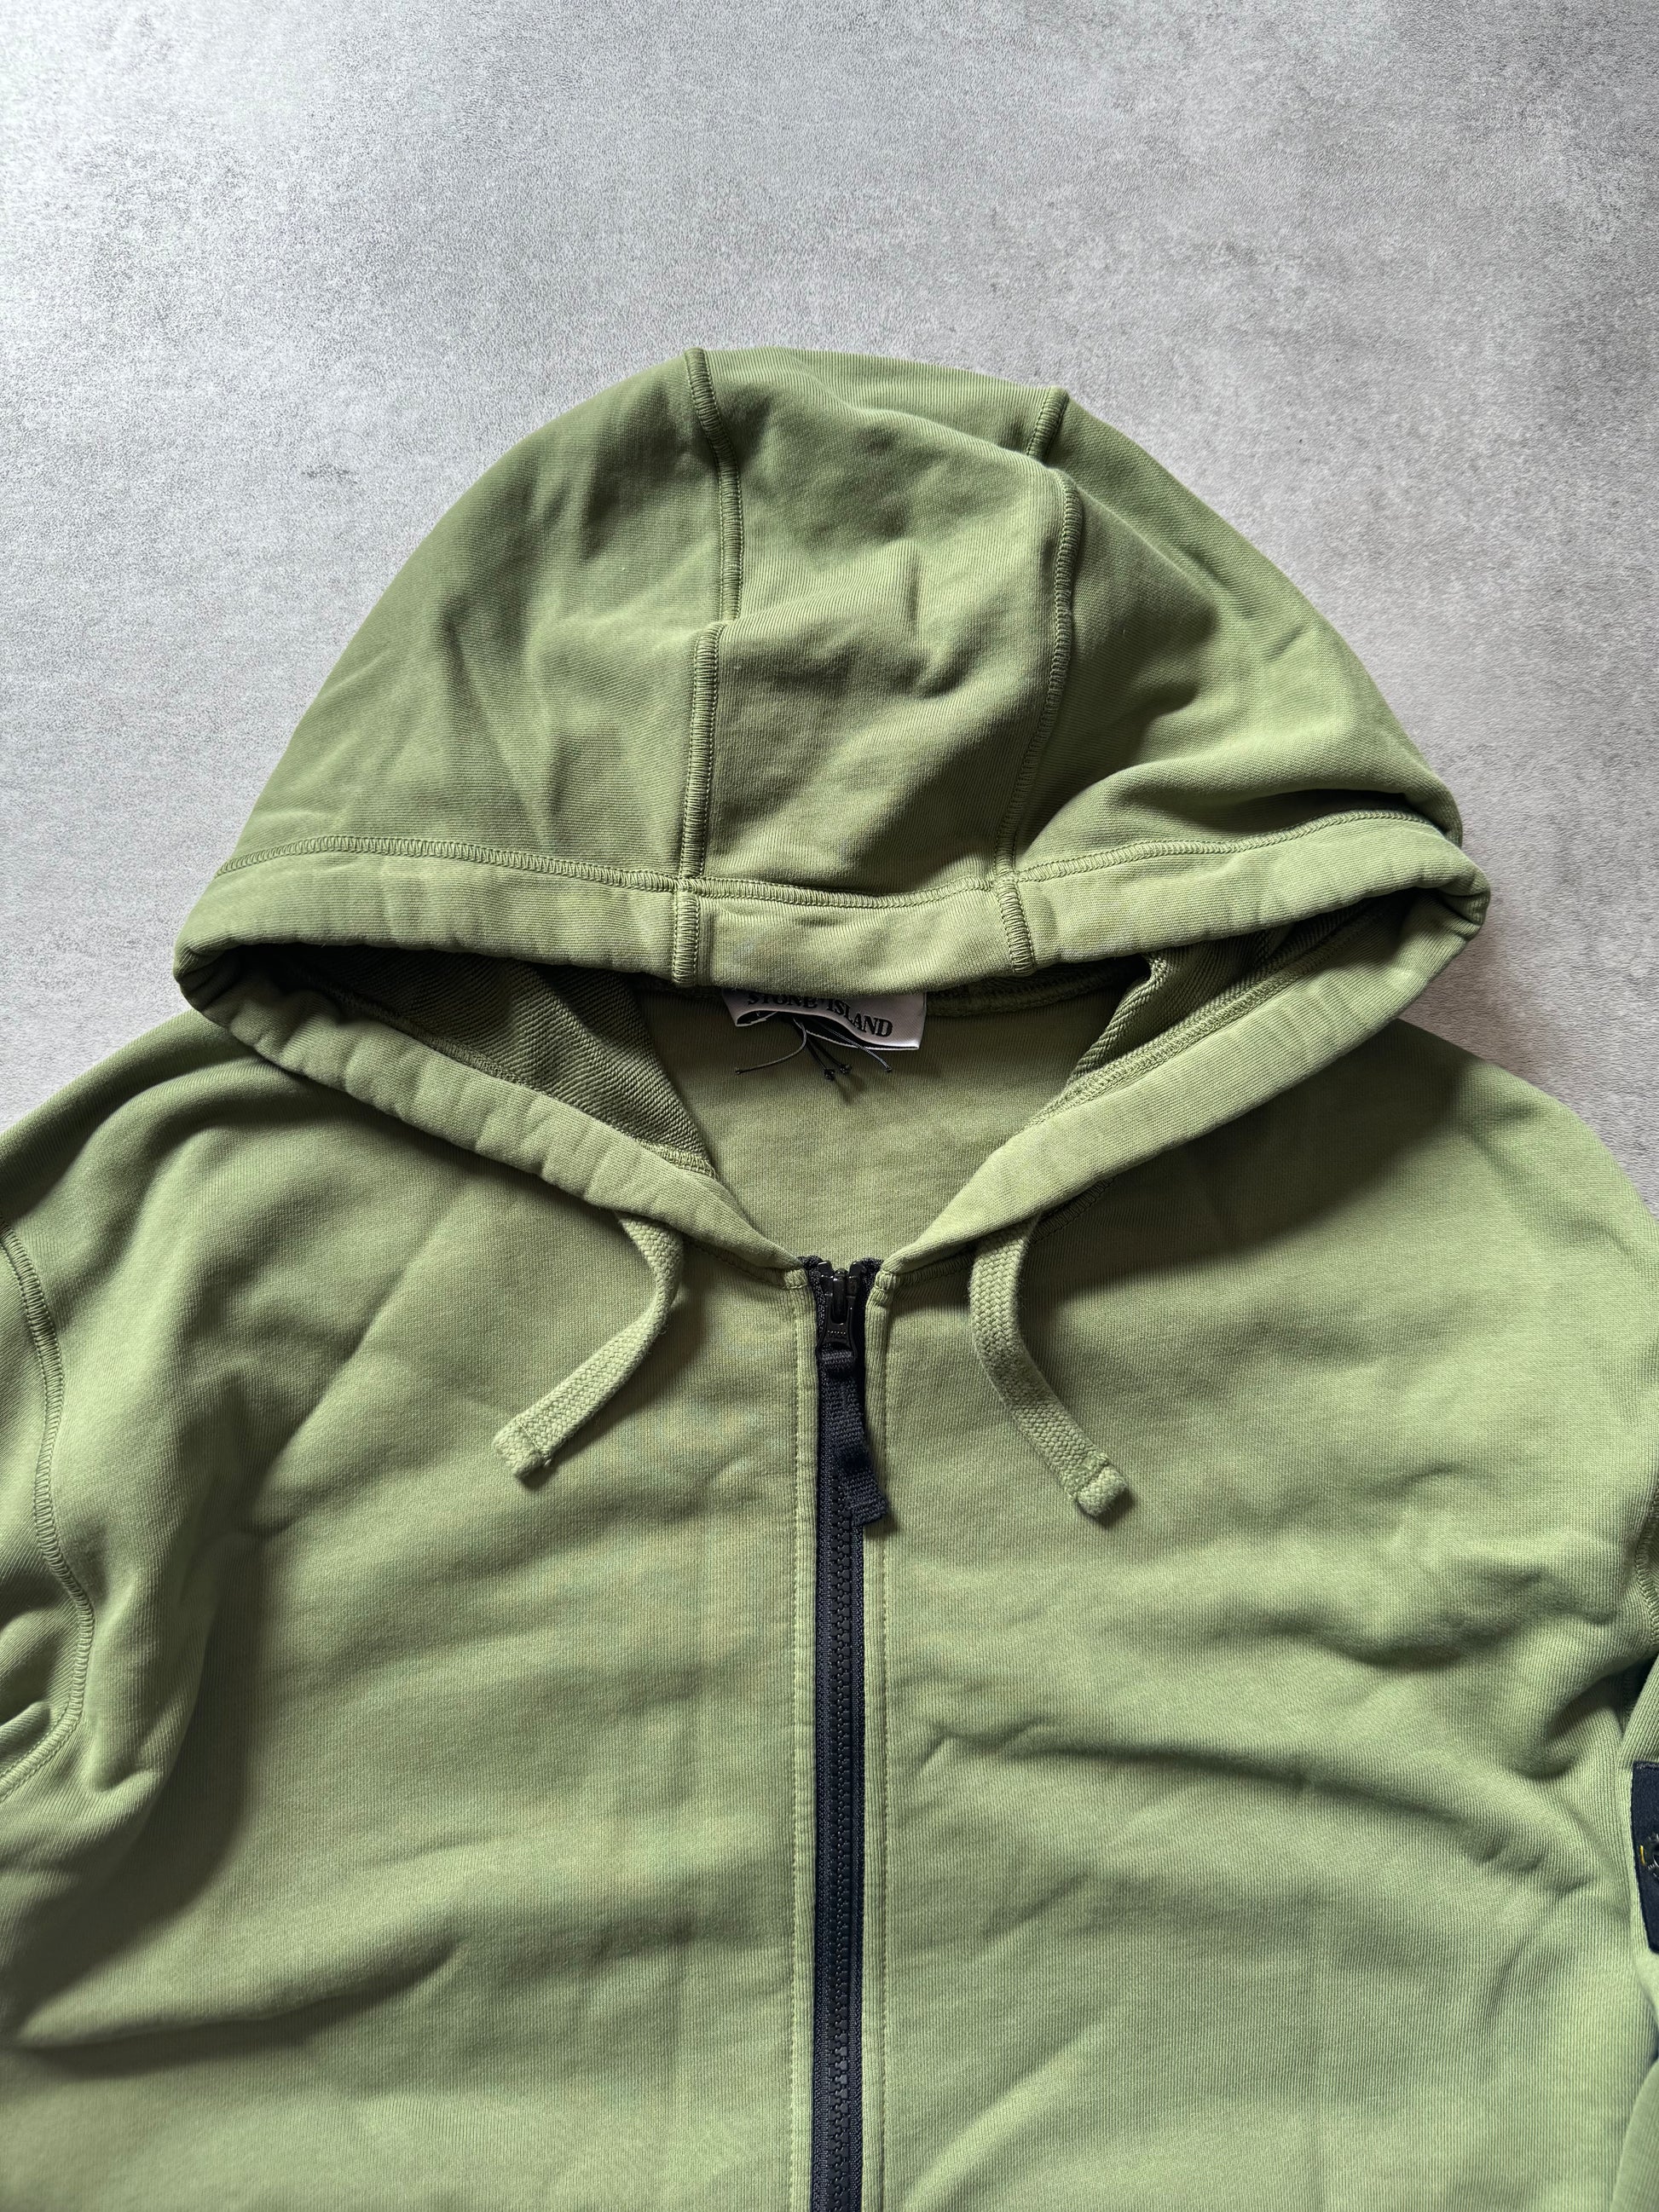 AW2021 Stone Island Olive Hooded Sweater (XL) - 7